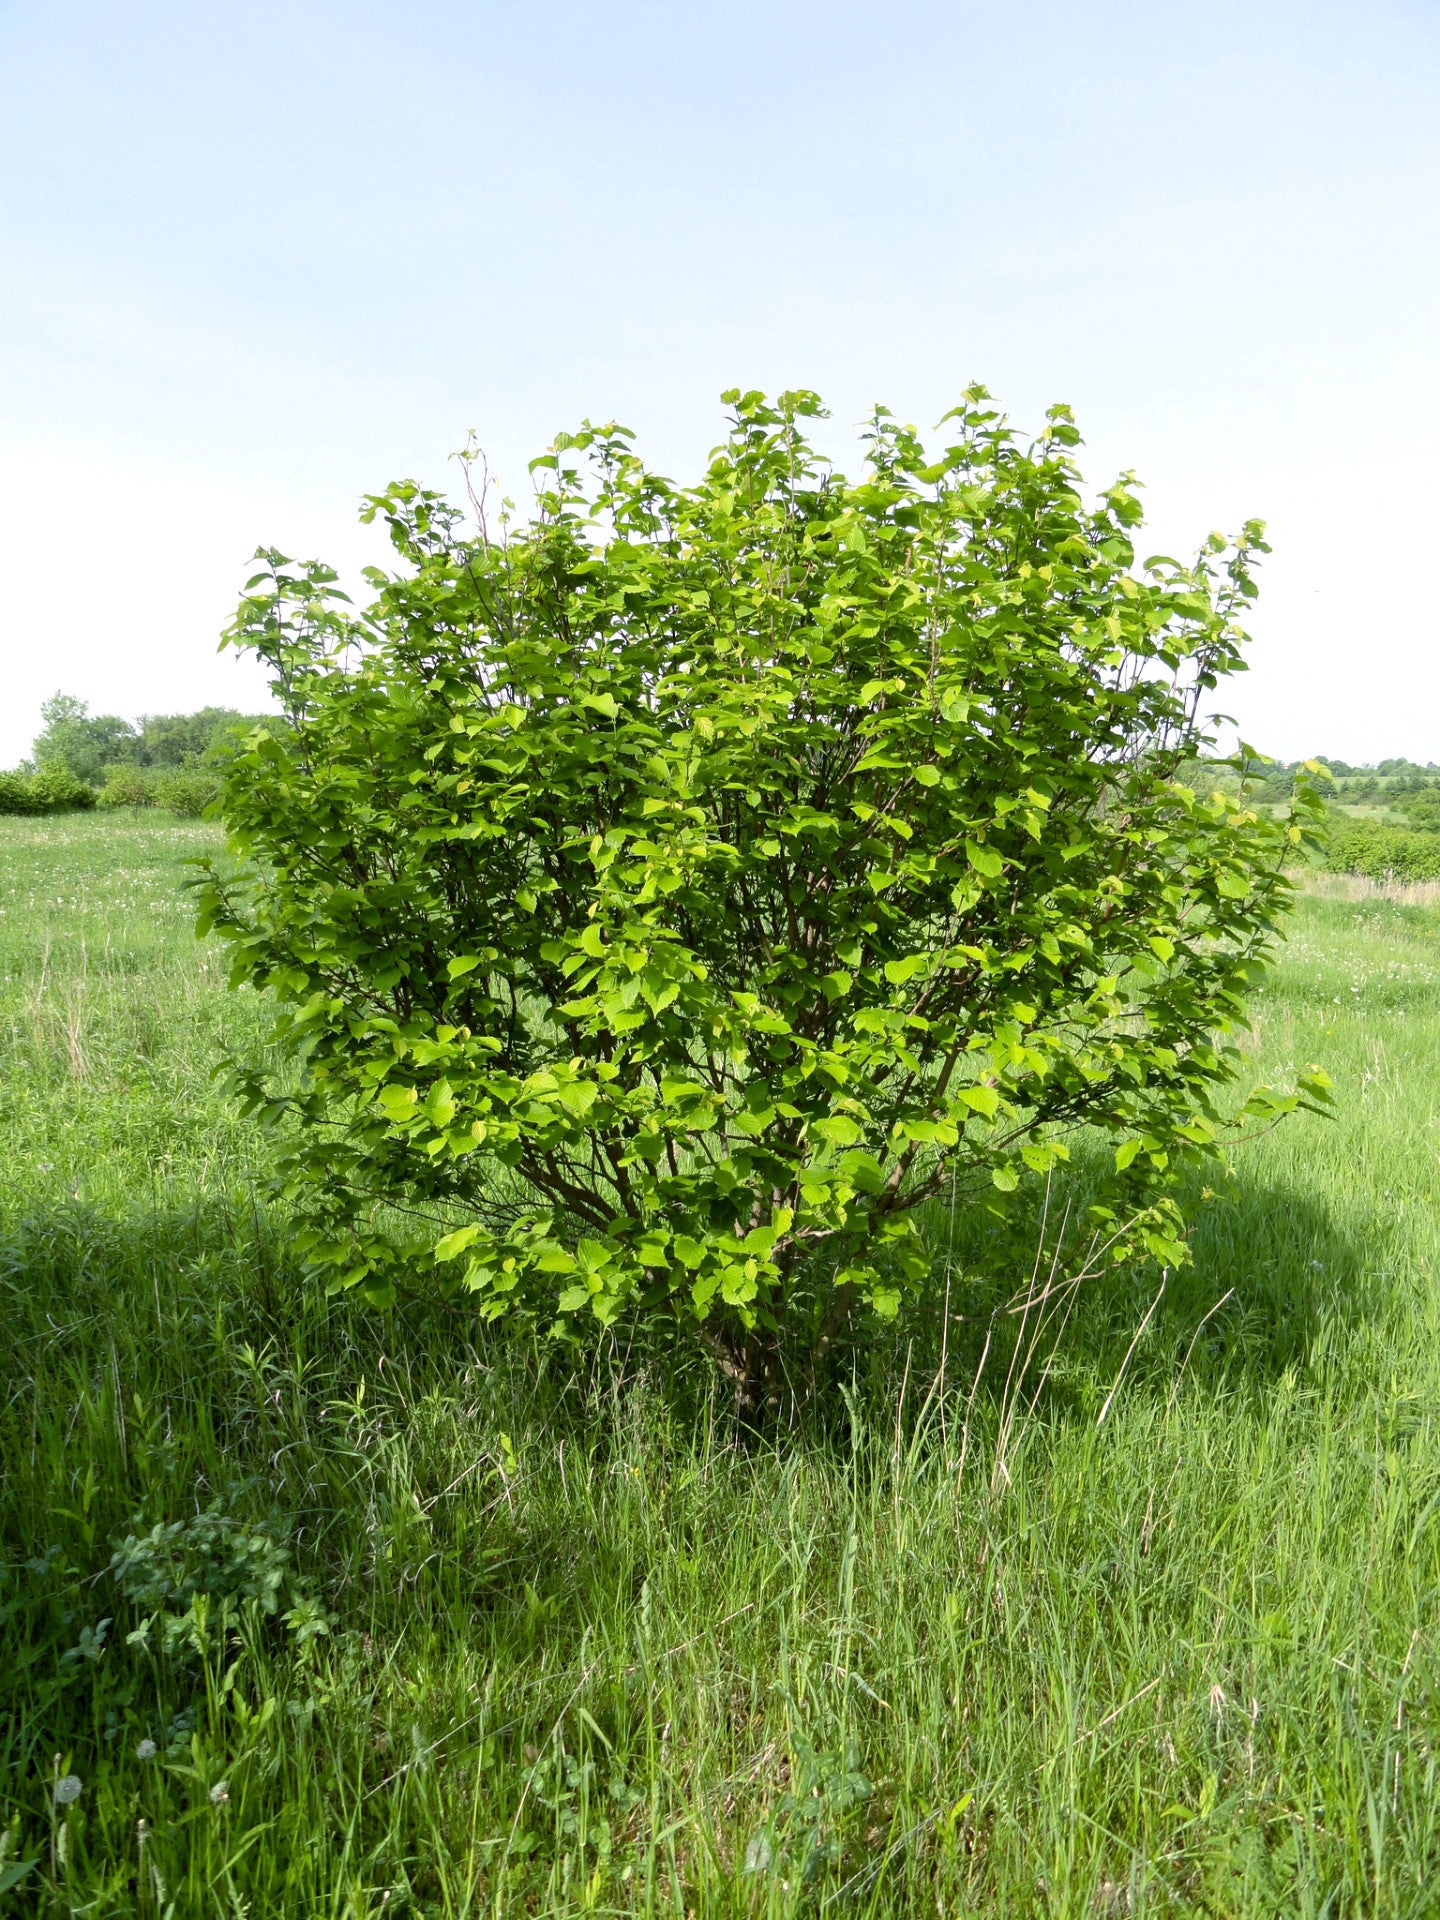 Hazelnuts mature into a rounded shrub approximately 8-12' tall x 8-10' wide